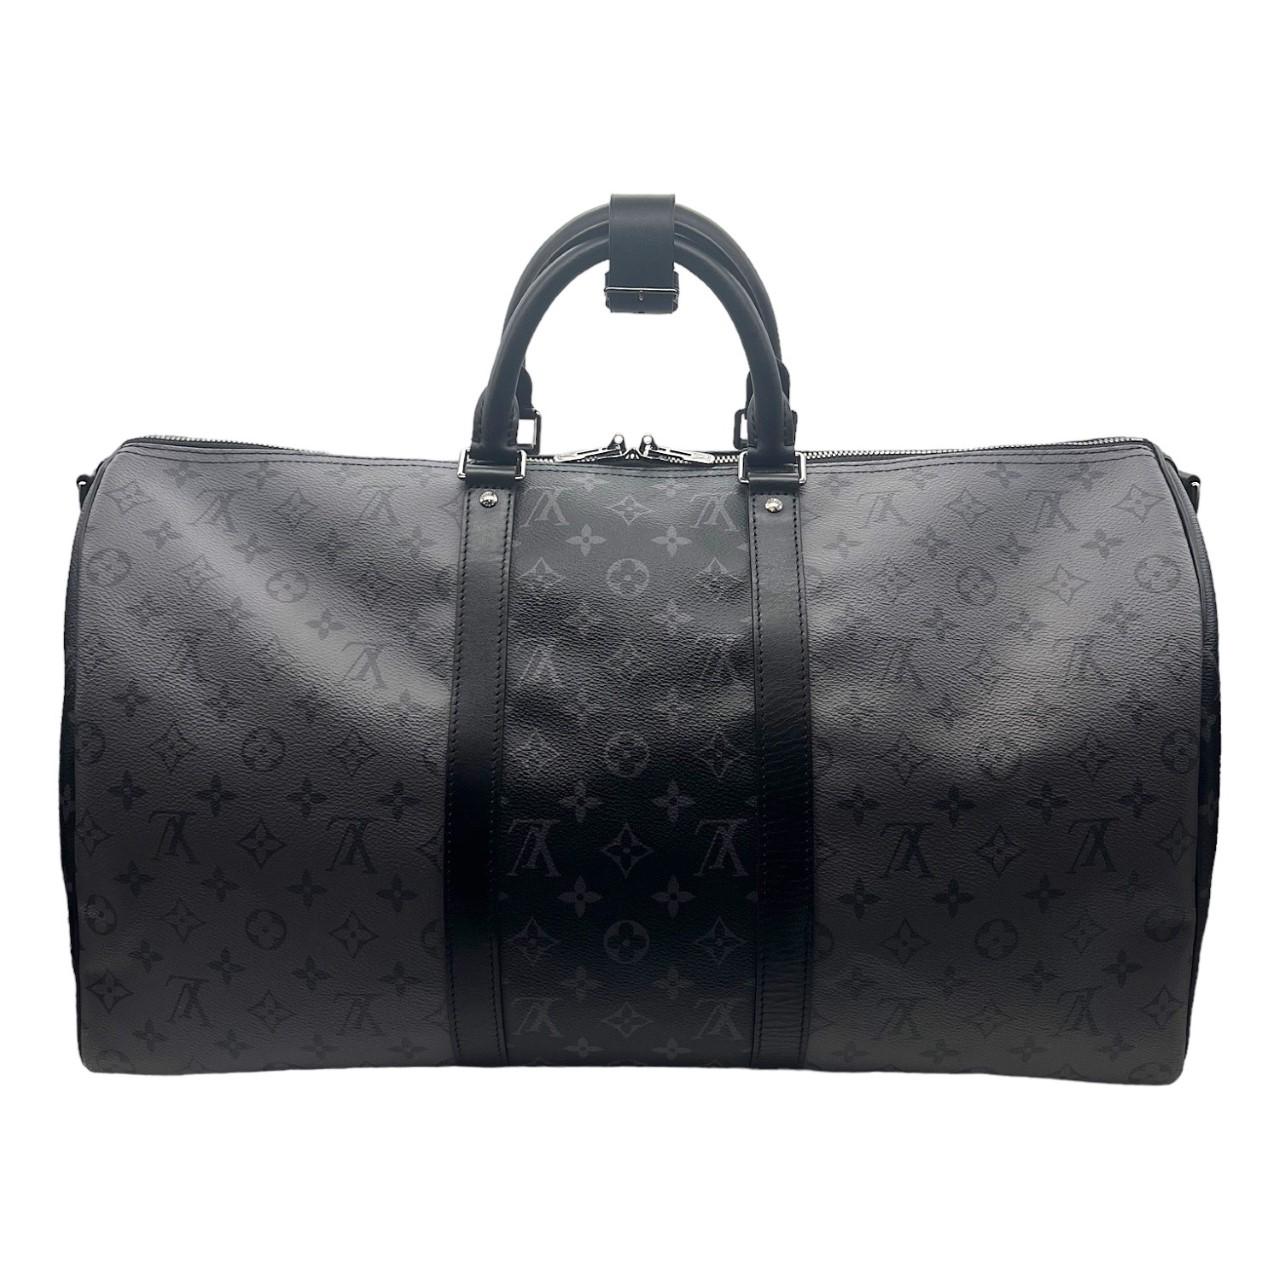 We are offering this very stunning Louis Vuitton travel bag. Made in France, this bag is finely crafted with a combination of Louis Vuitton's dark Monogram Eclipse coated canvas and the lighter Monogram Eclipse Reverse coated canvas with black